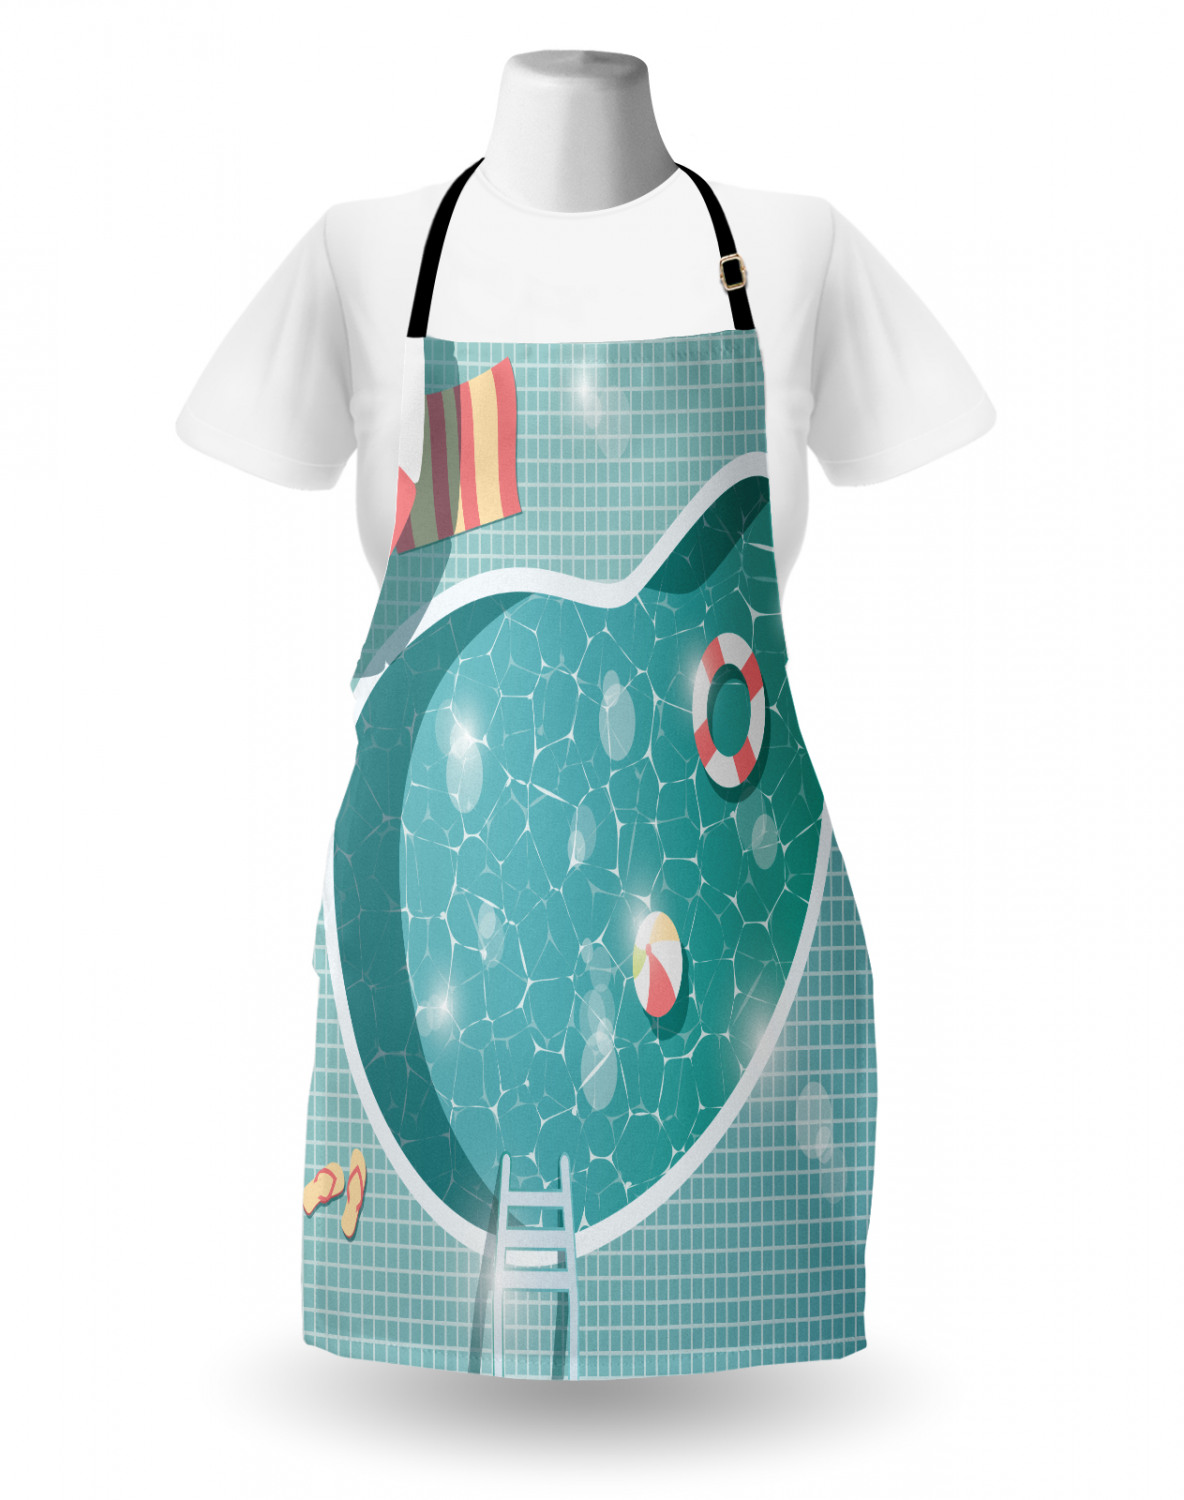 Details about   Ambesonne Apron Bib Adjustable Neck for Gardening Cooking Clear Image 